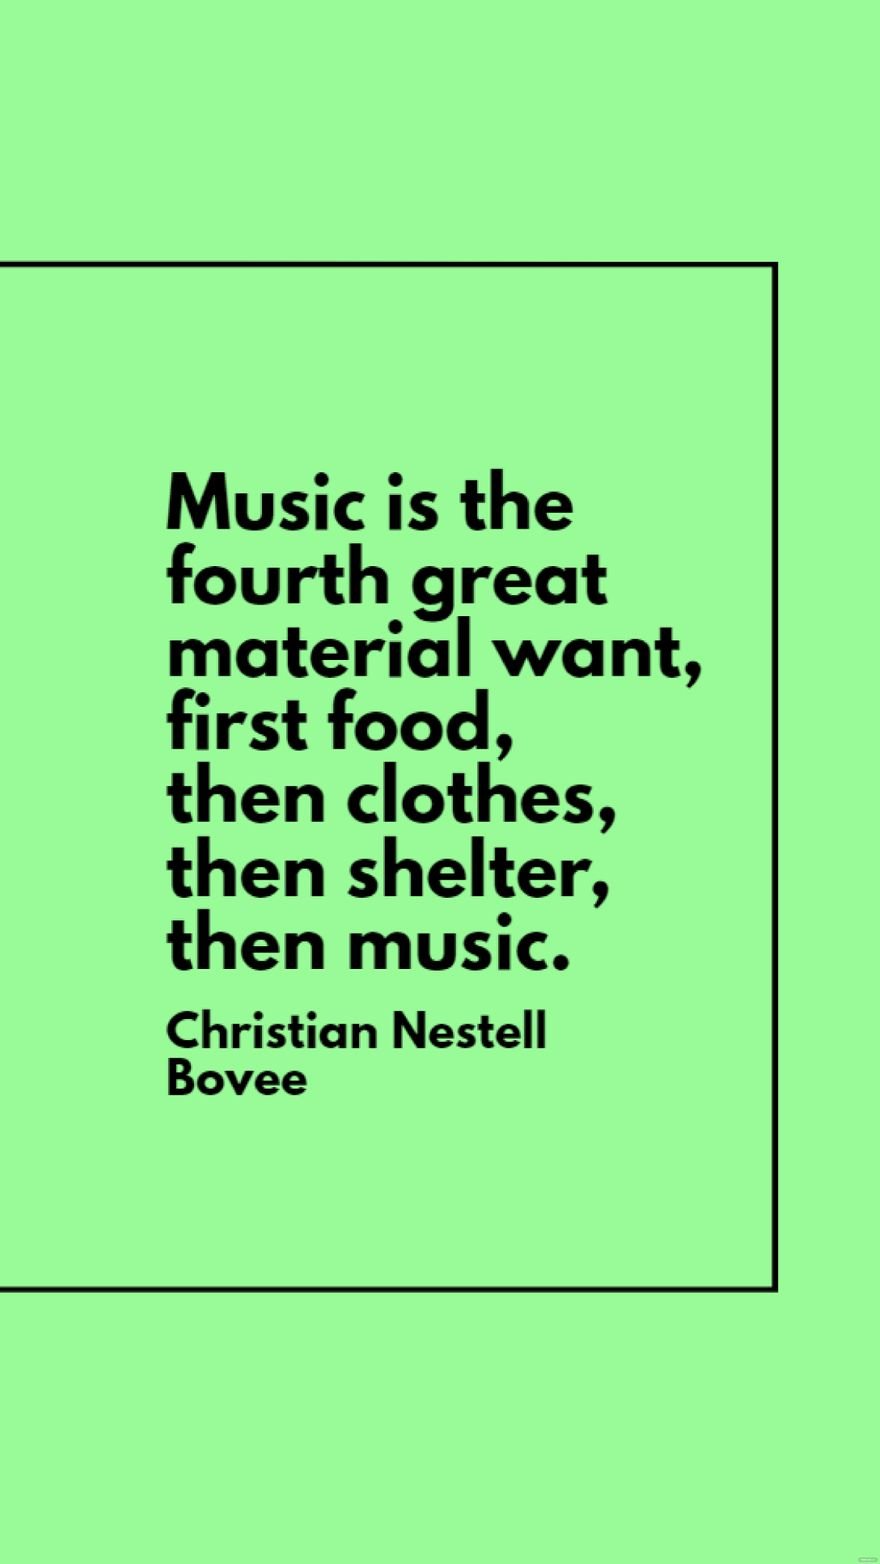 Christian Nestell Bovee - Music is the fourth great material want, first food, then clothes, then shelter, then music.